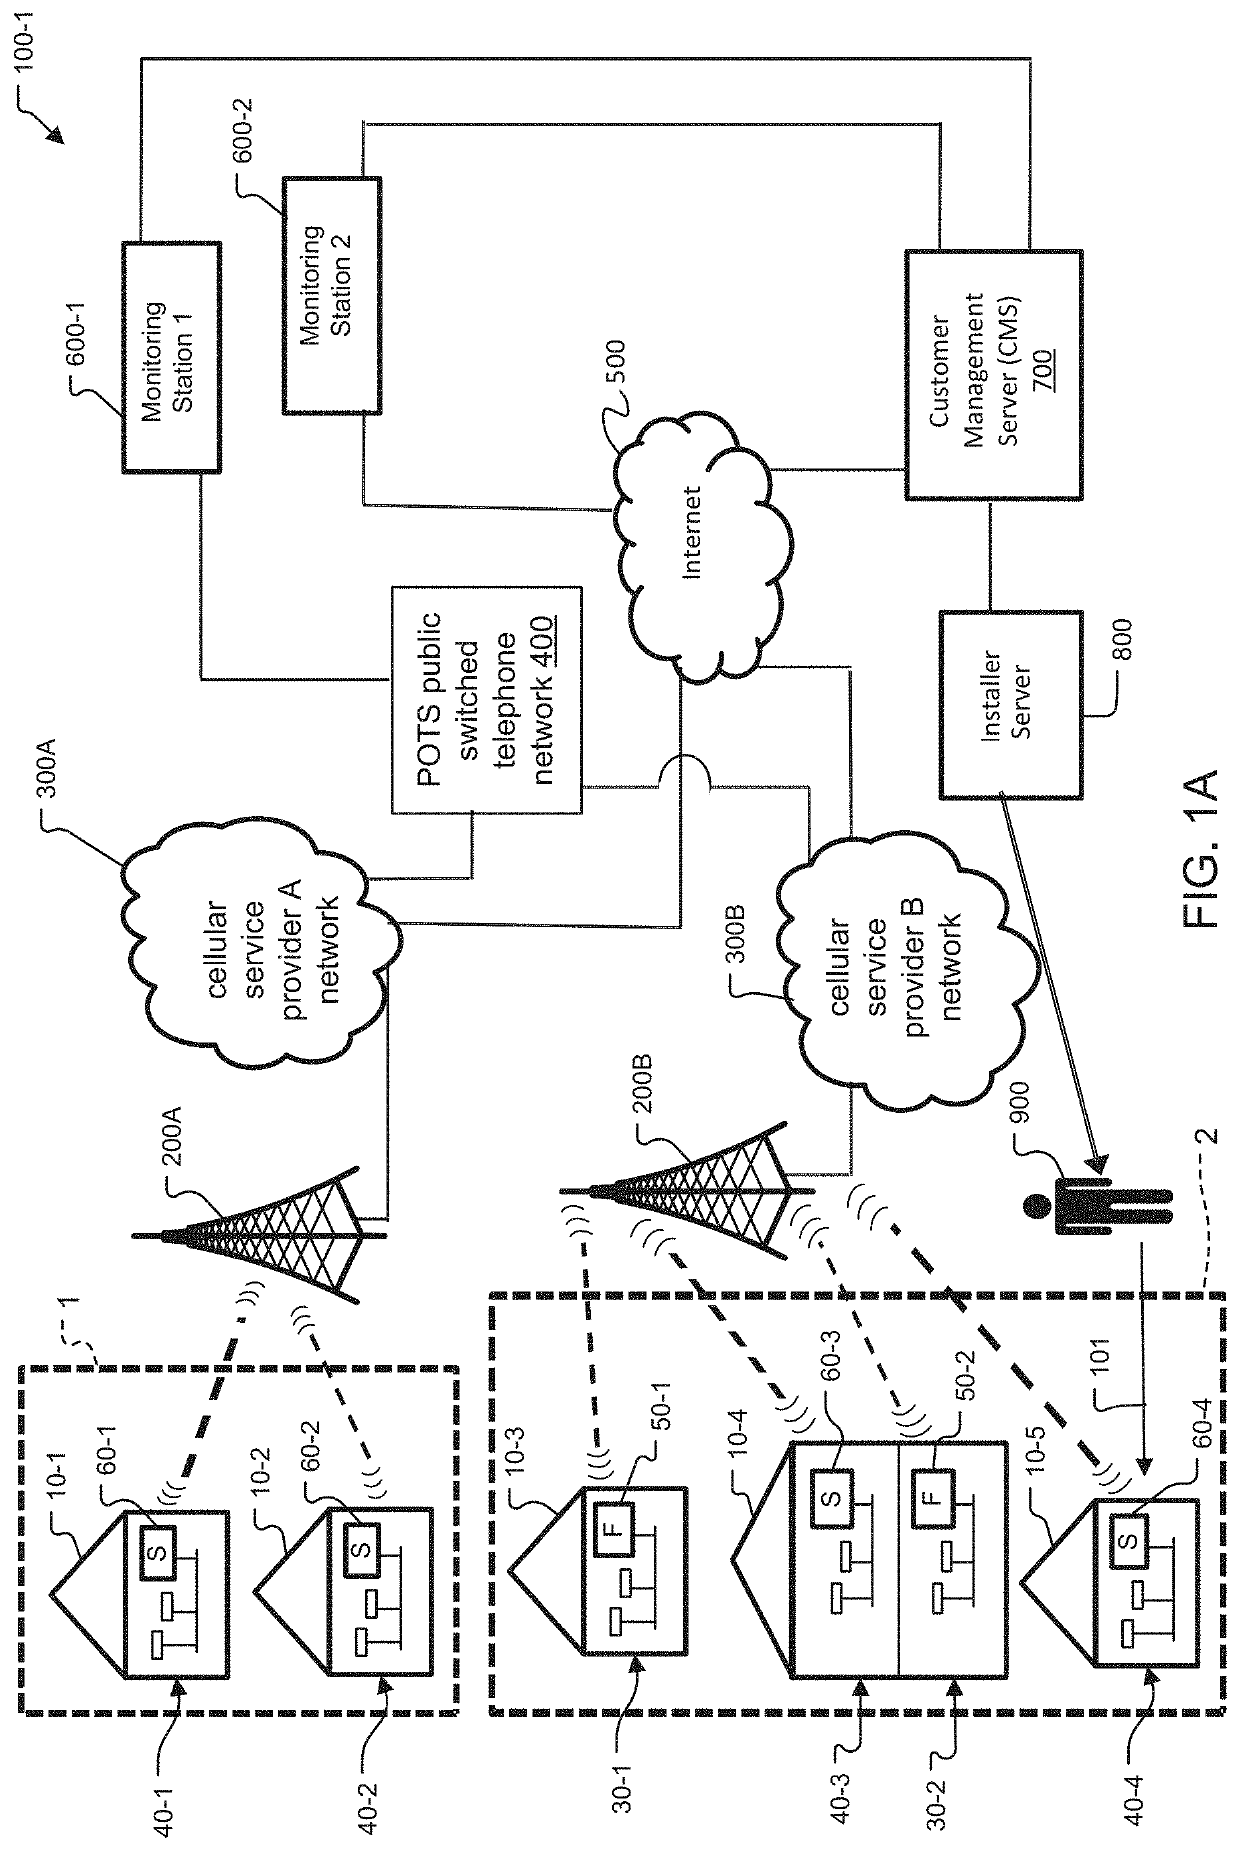 Network data aggregation system and method for building management systems